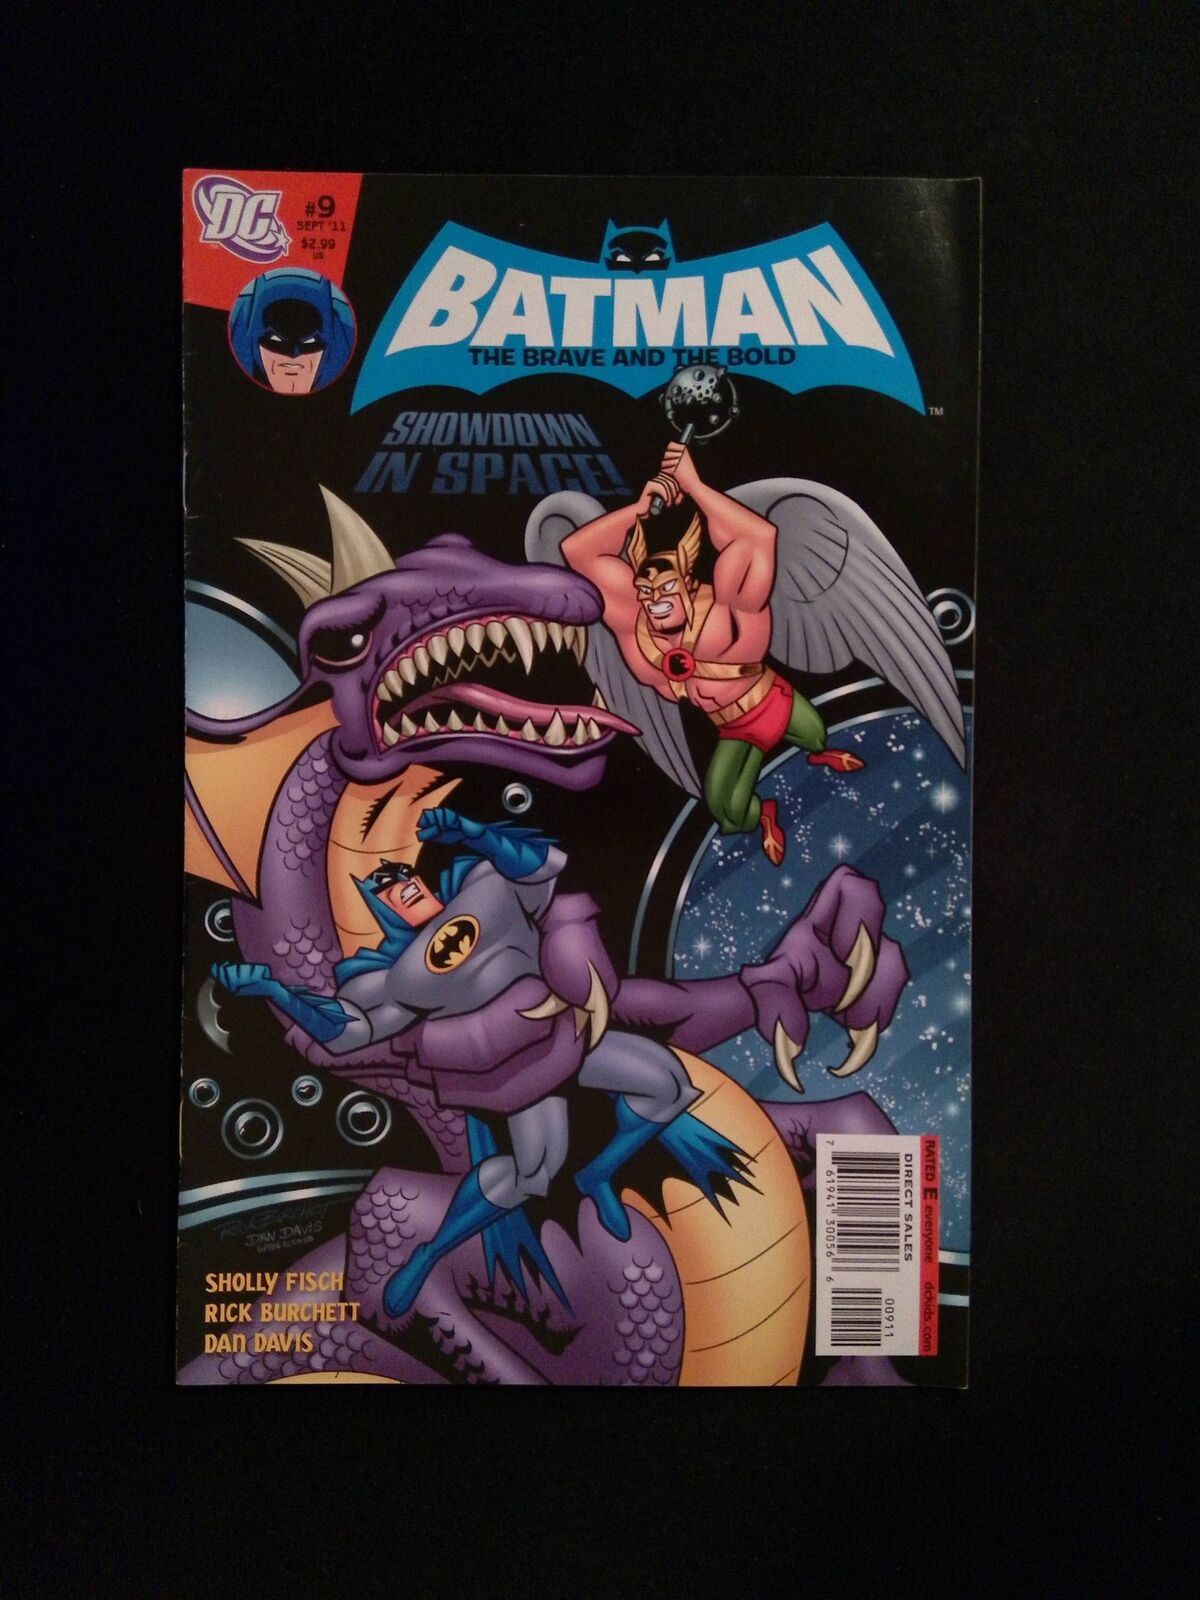 All New Batman The Brave and the Bold #9  DC/Johnny DC Comics 2011 VF+